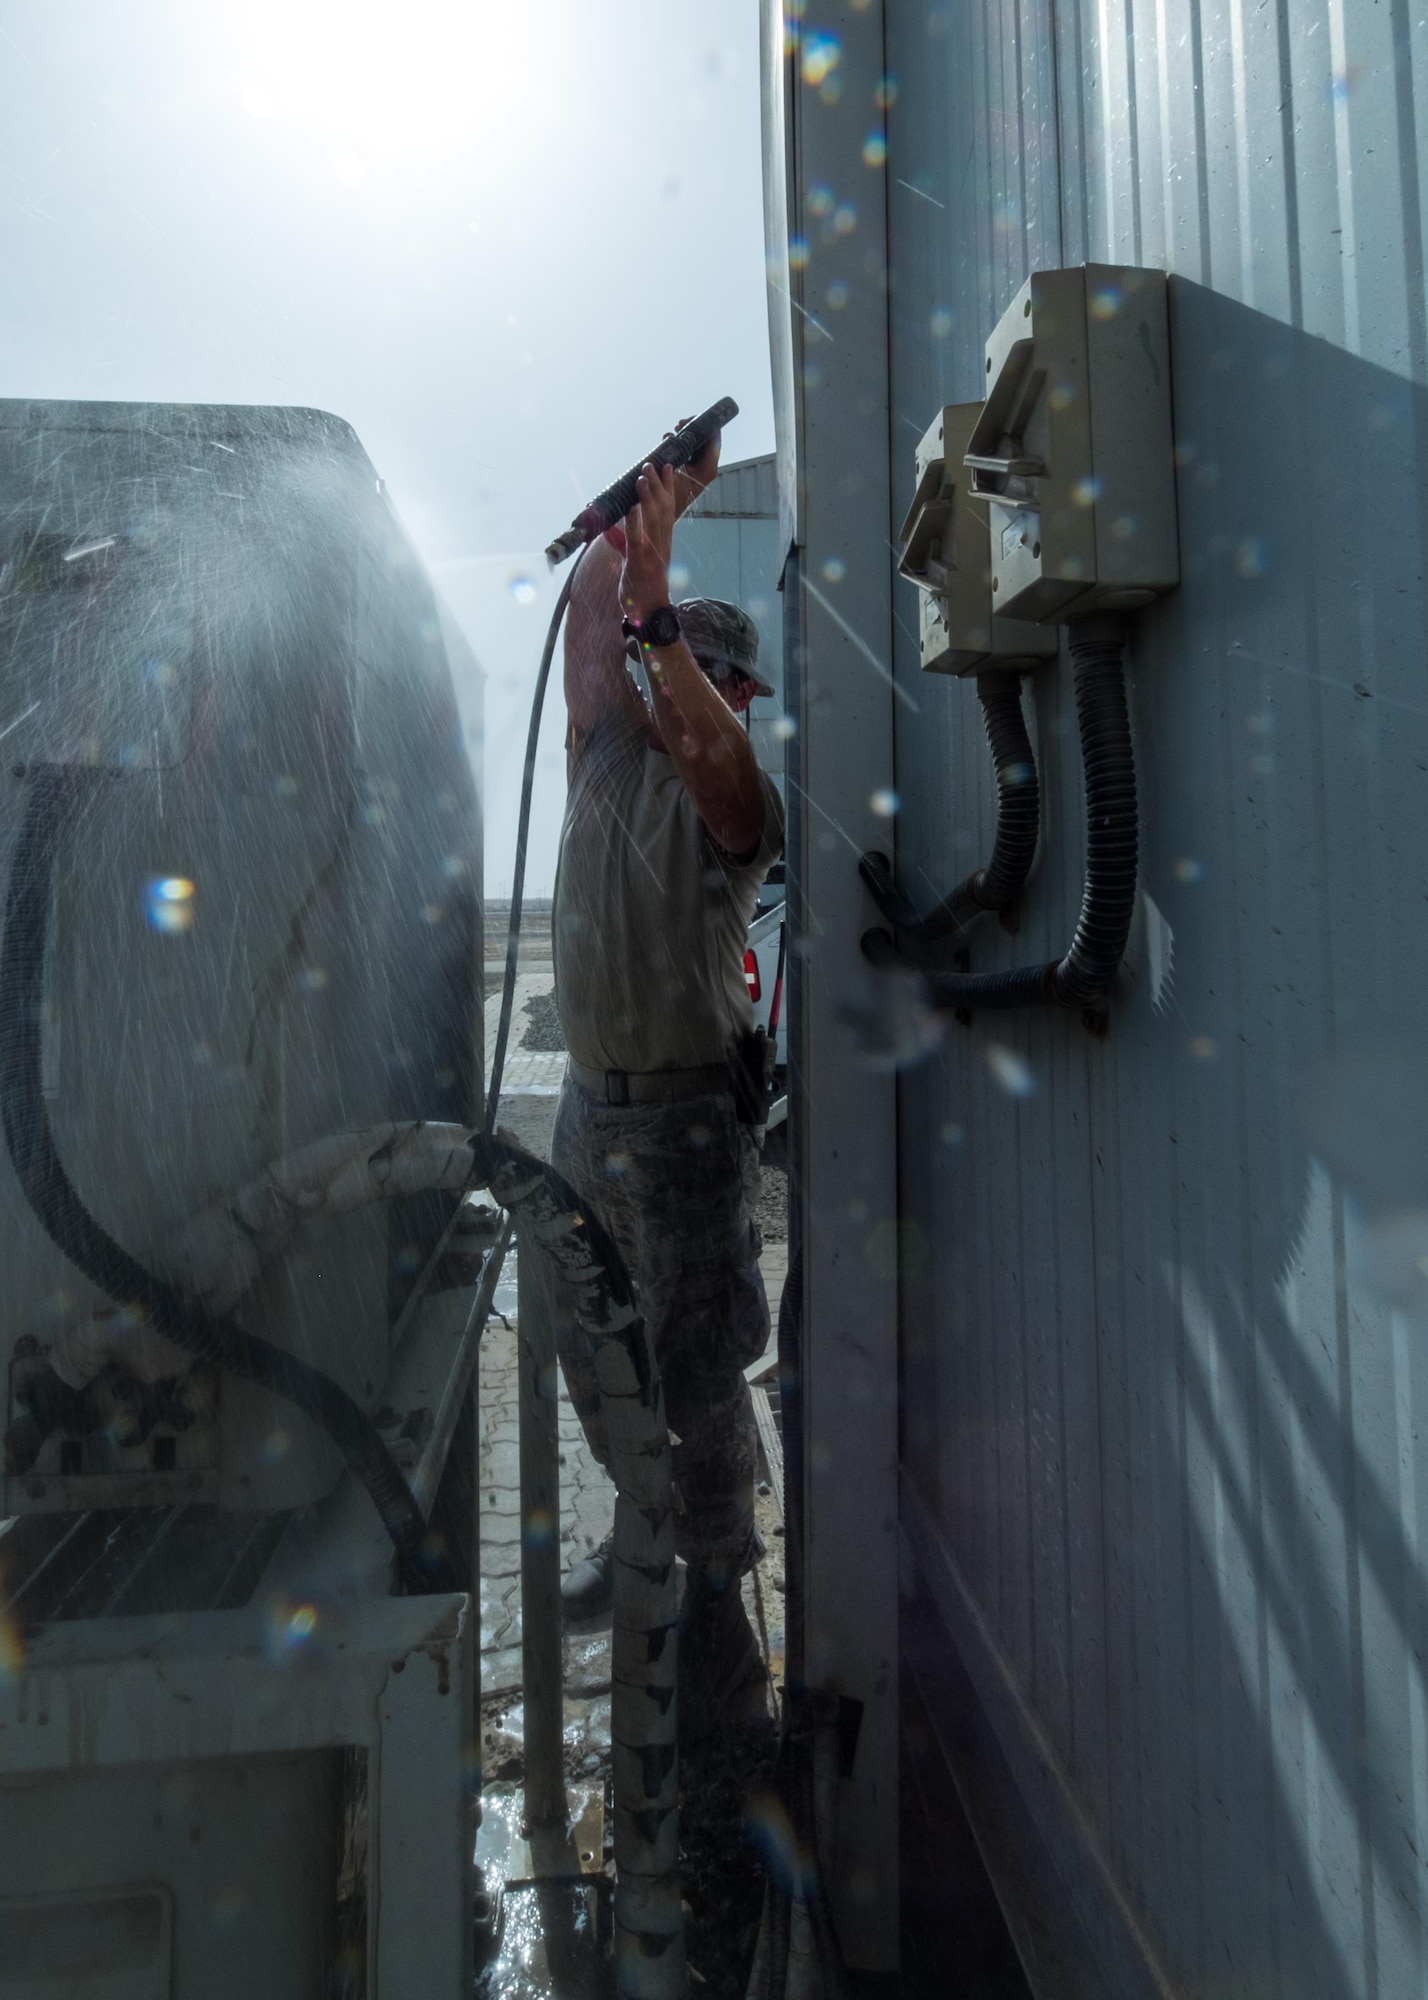 Tech. Sgt. James, 380th Expeditionary Civil Engineer Squadron heating, ventilation, and air conditioning technician, washes air conditioner condenser coils August 8, 2017, at Al Dhafra Air Base, United Arab Emirates.